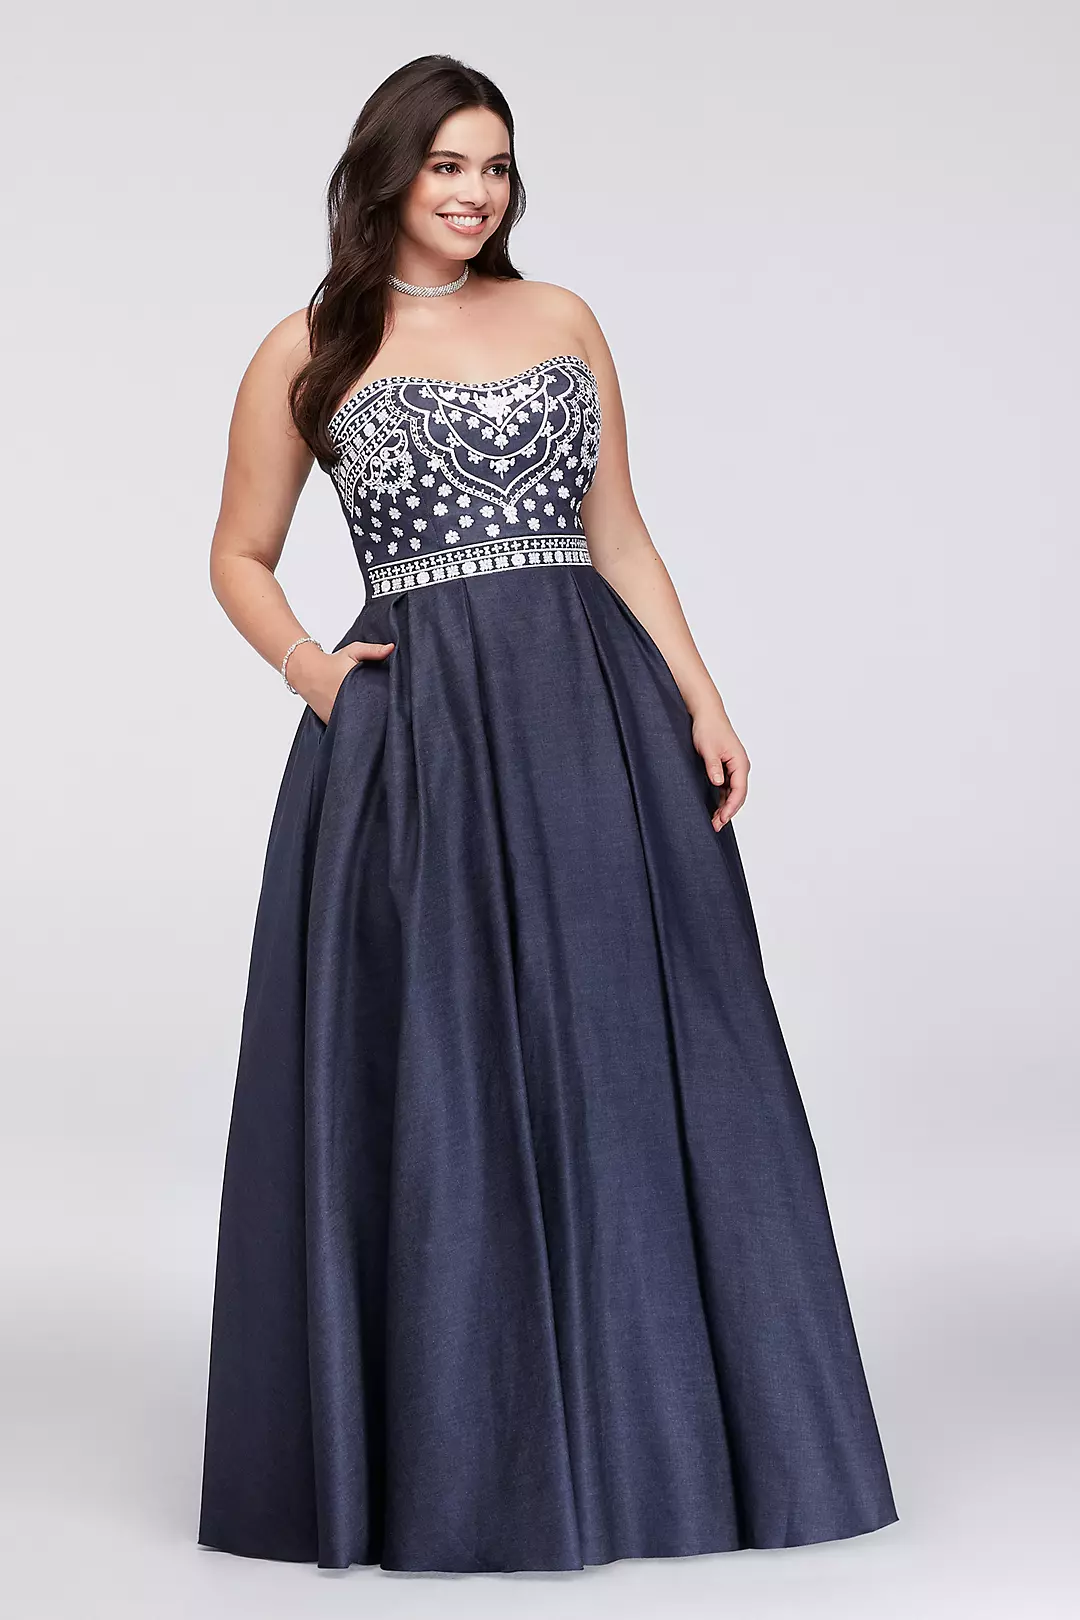 Embroidered Denim Ball Gown Image